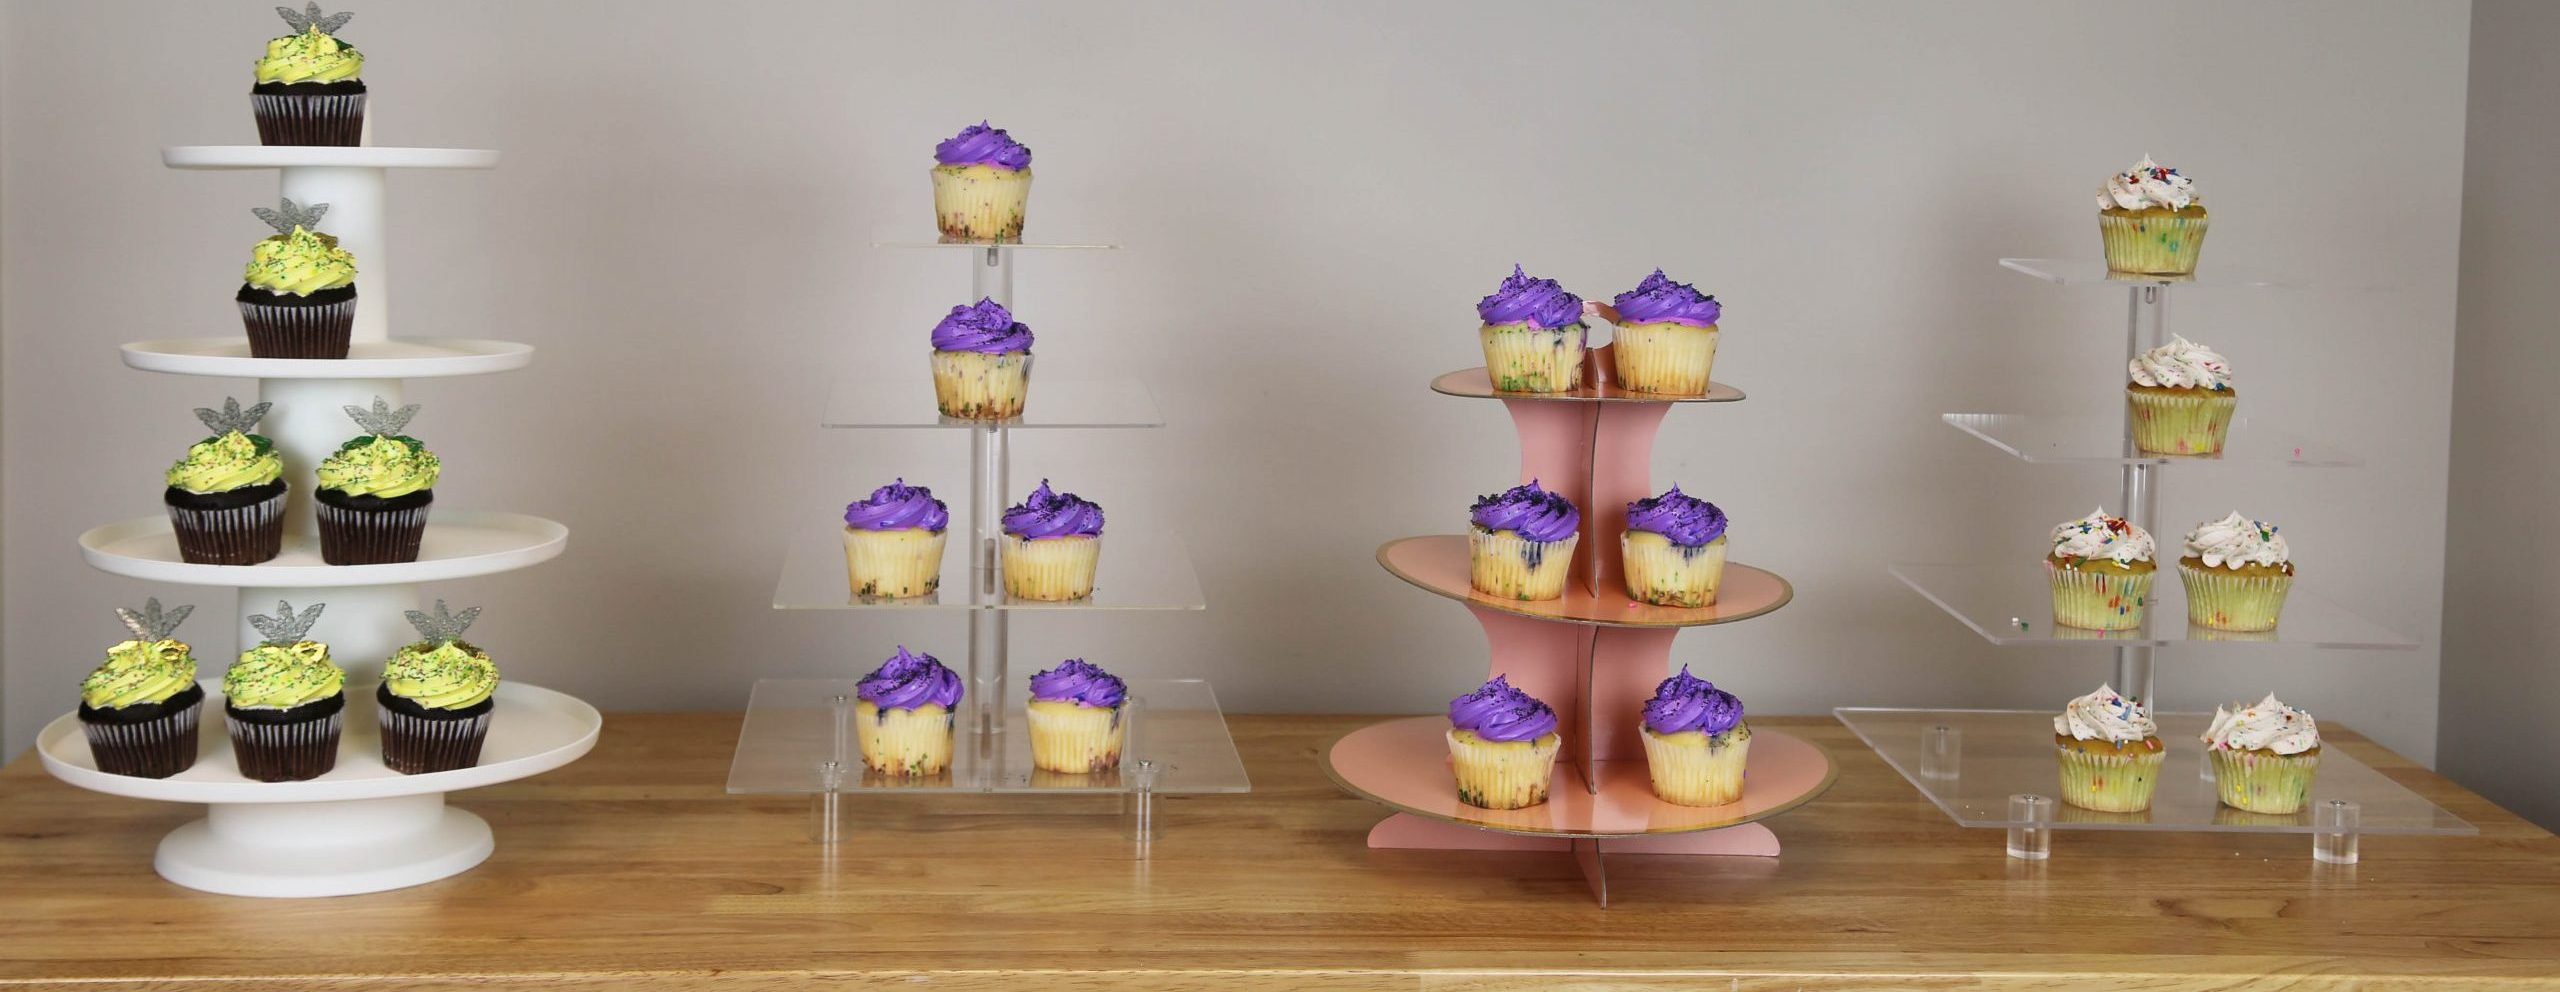 Alessi 1 Pc Party Cupcake Tower Cupcake Display Stand Paper Cake Stand 